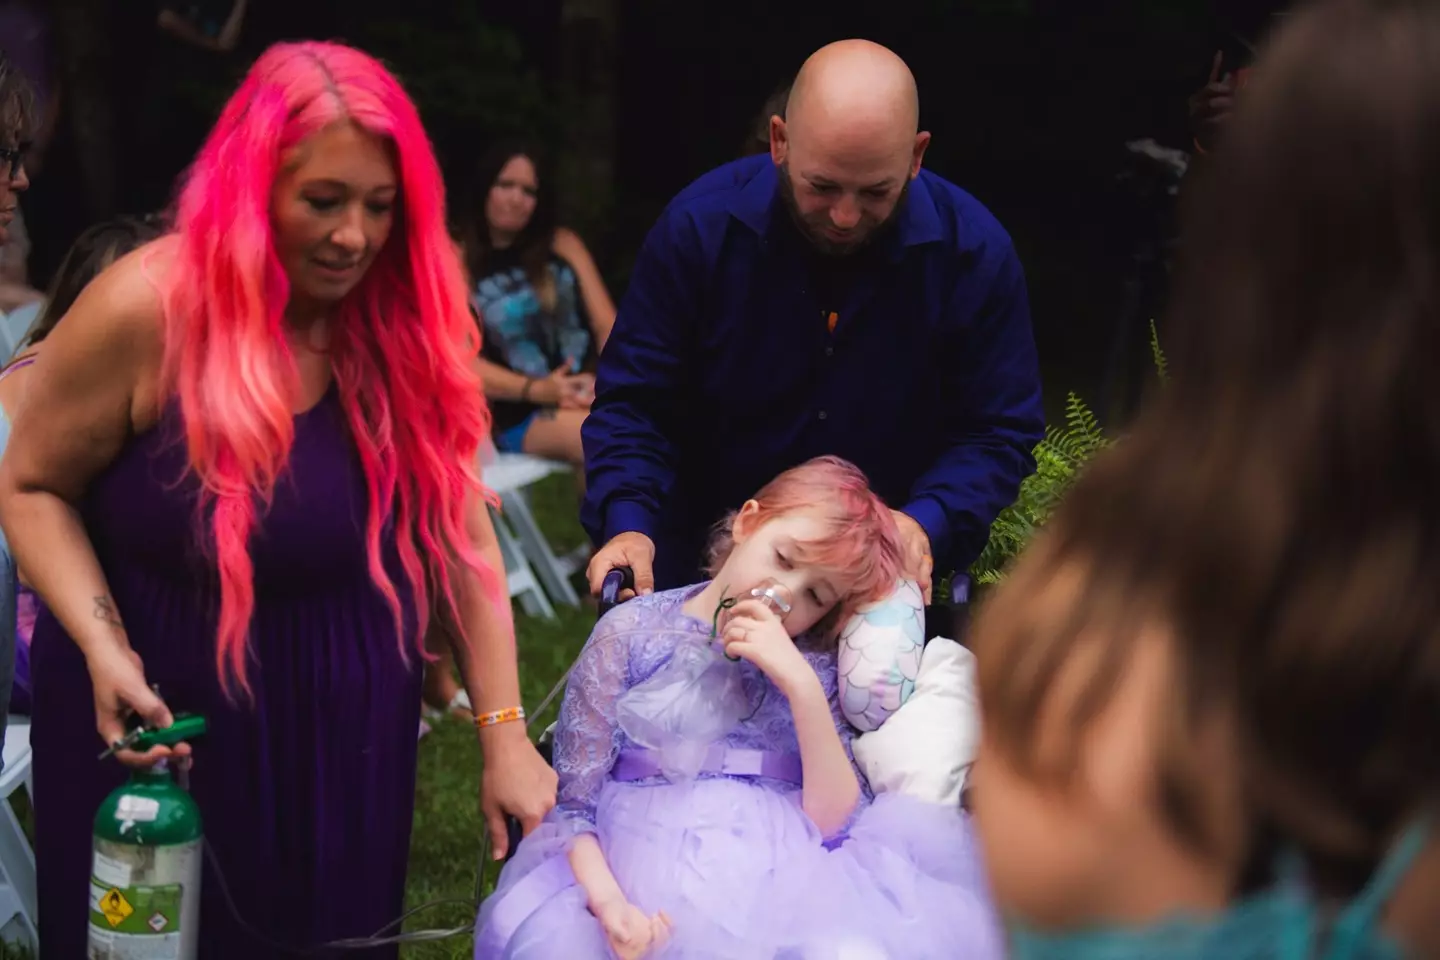 Family and friends rallied round to give Emma a special day.